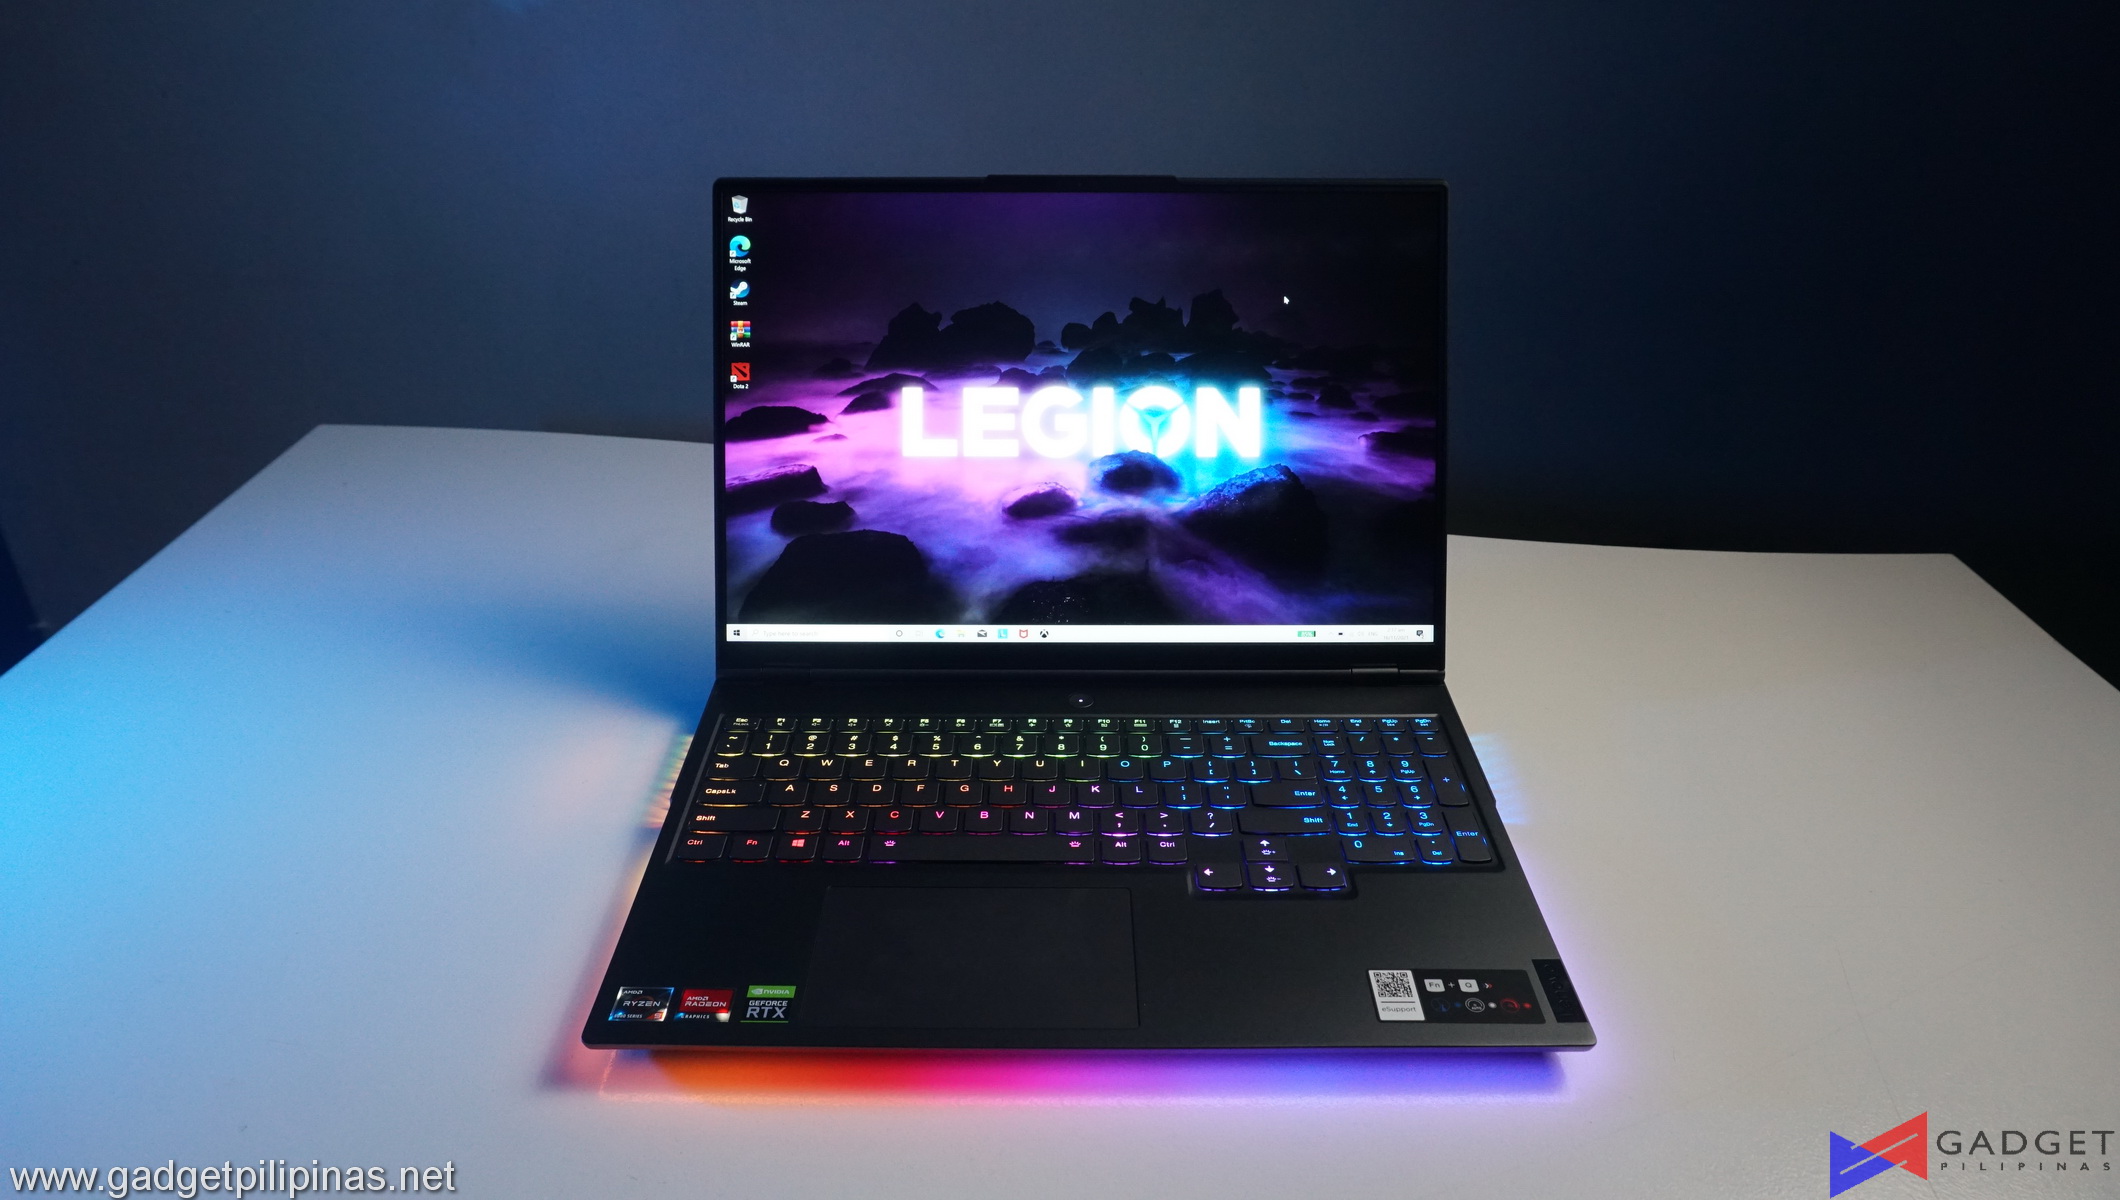 Lenovo Legion 7 RTX 3080 Hands On and First Impressions